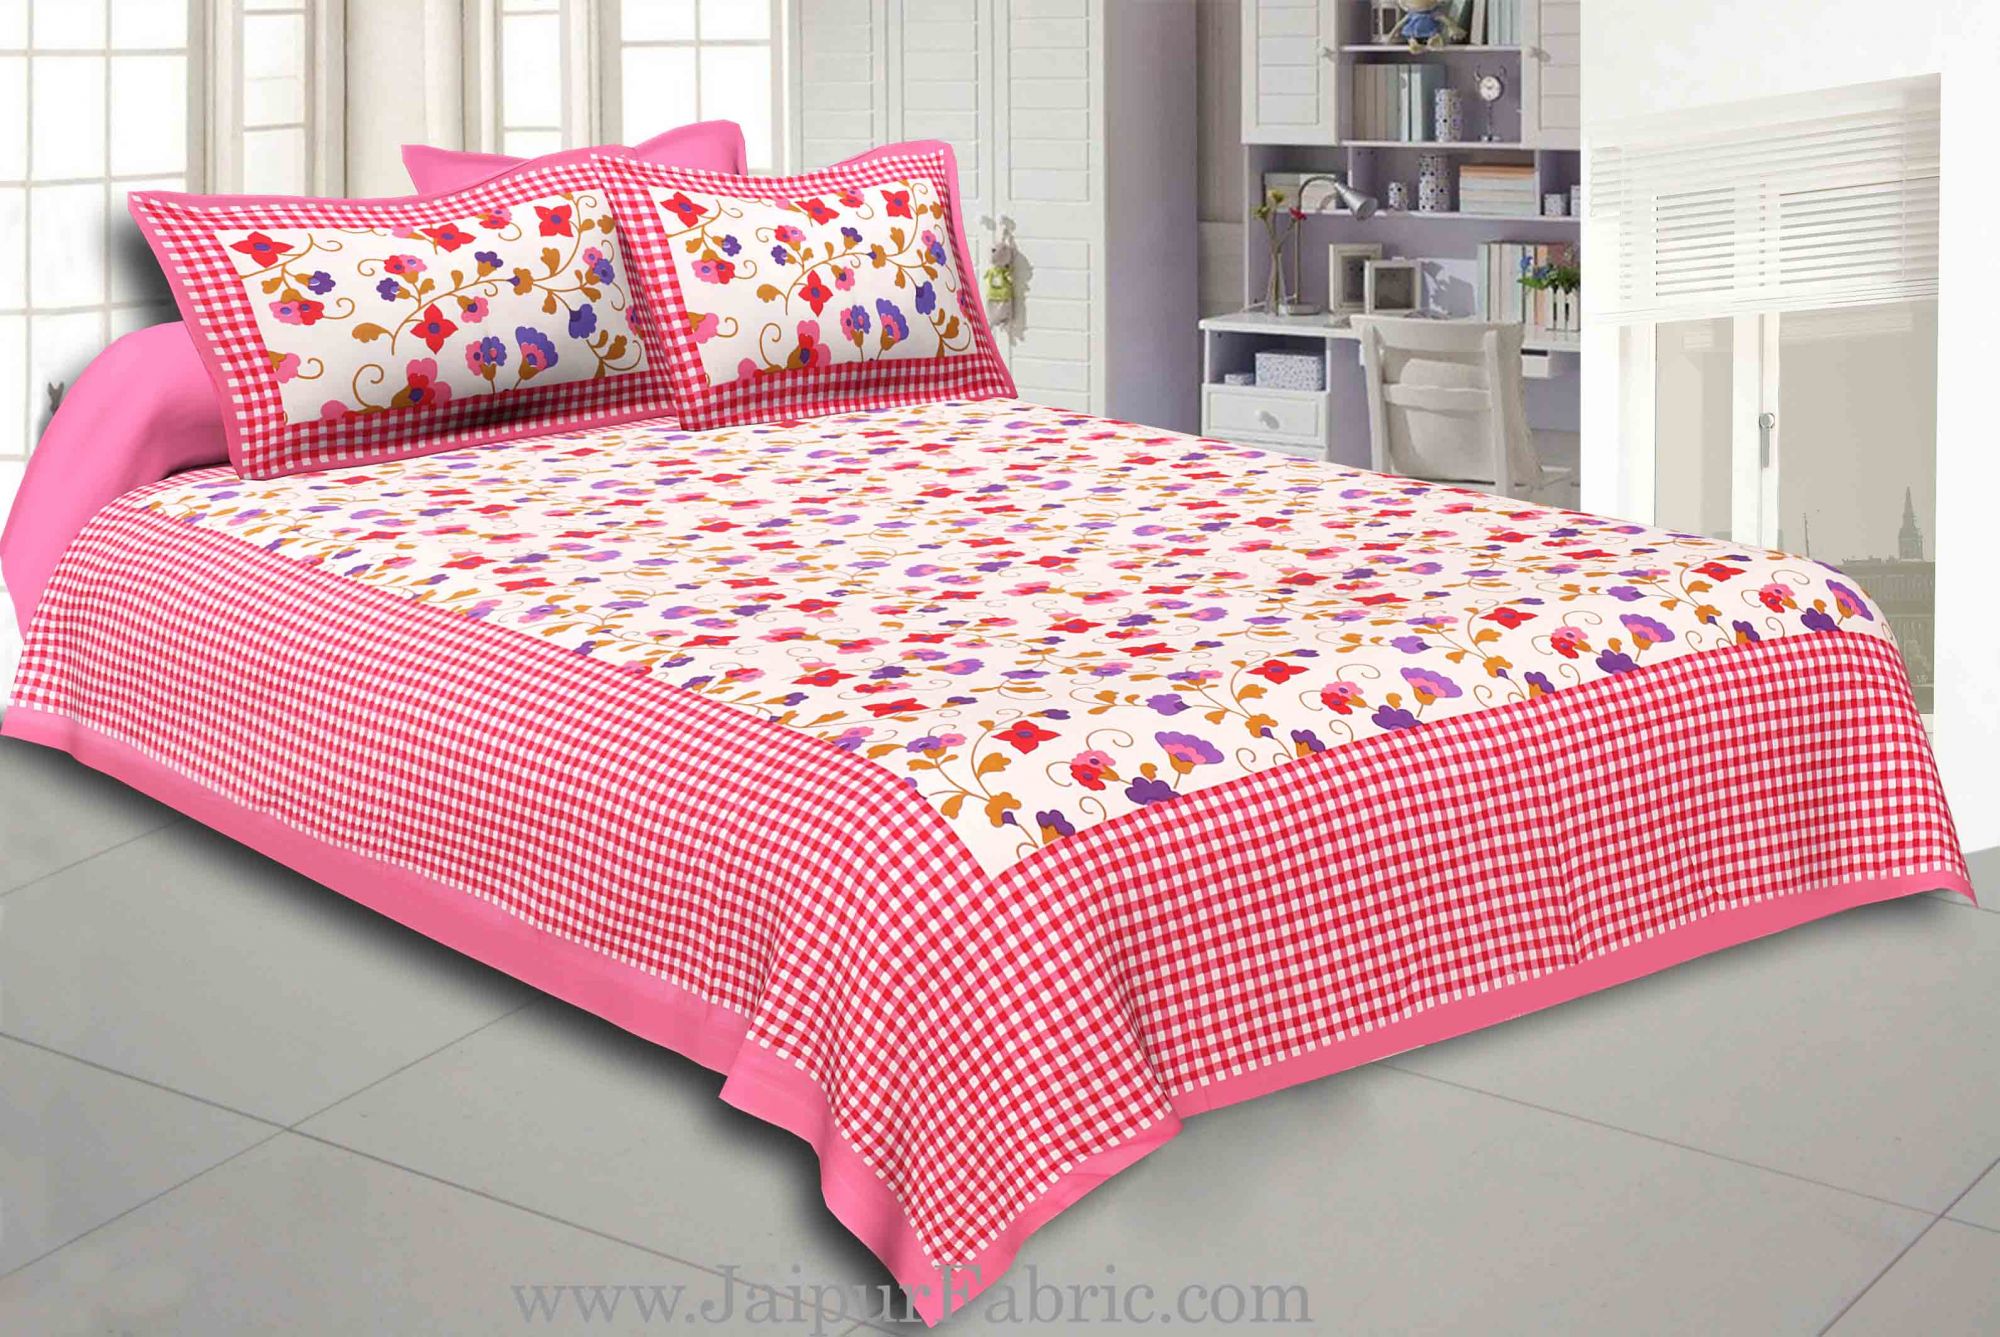 Pink Border jaipuri design floral print Cotton Double Bedsheet with Pillow Cover